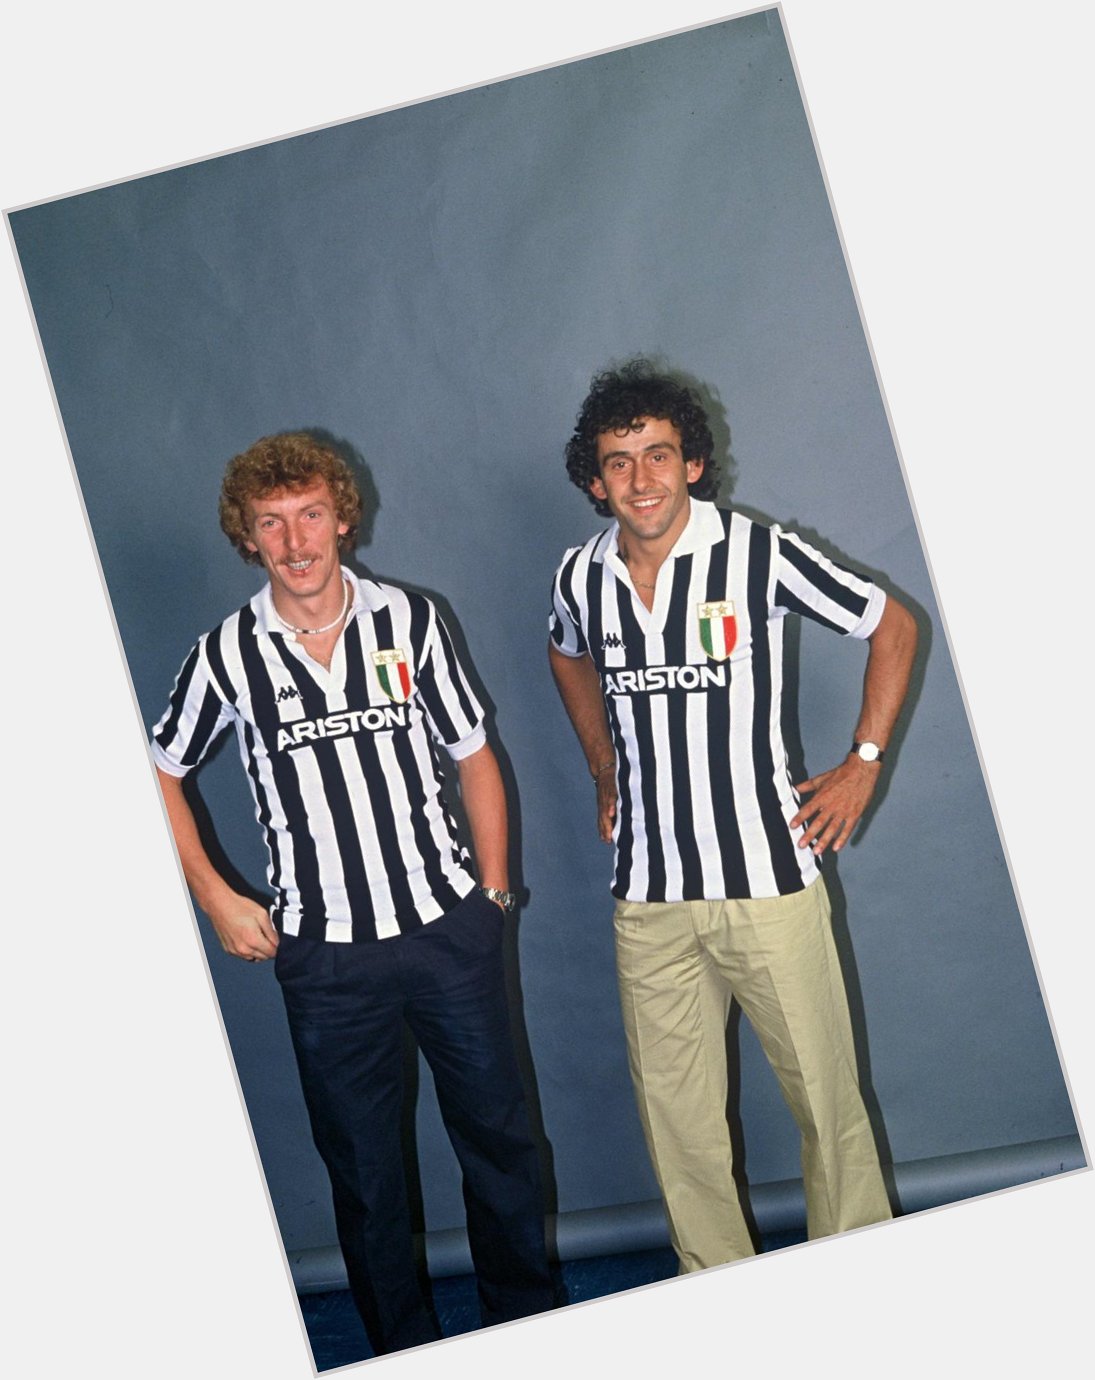 Happy 60th Birthday...Juventus legend Michel Platini. Signed from Saint-Etienne, after the 1982 World Cup in Spain. 